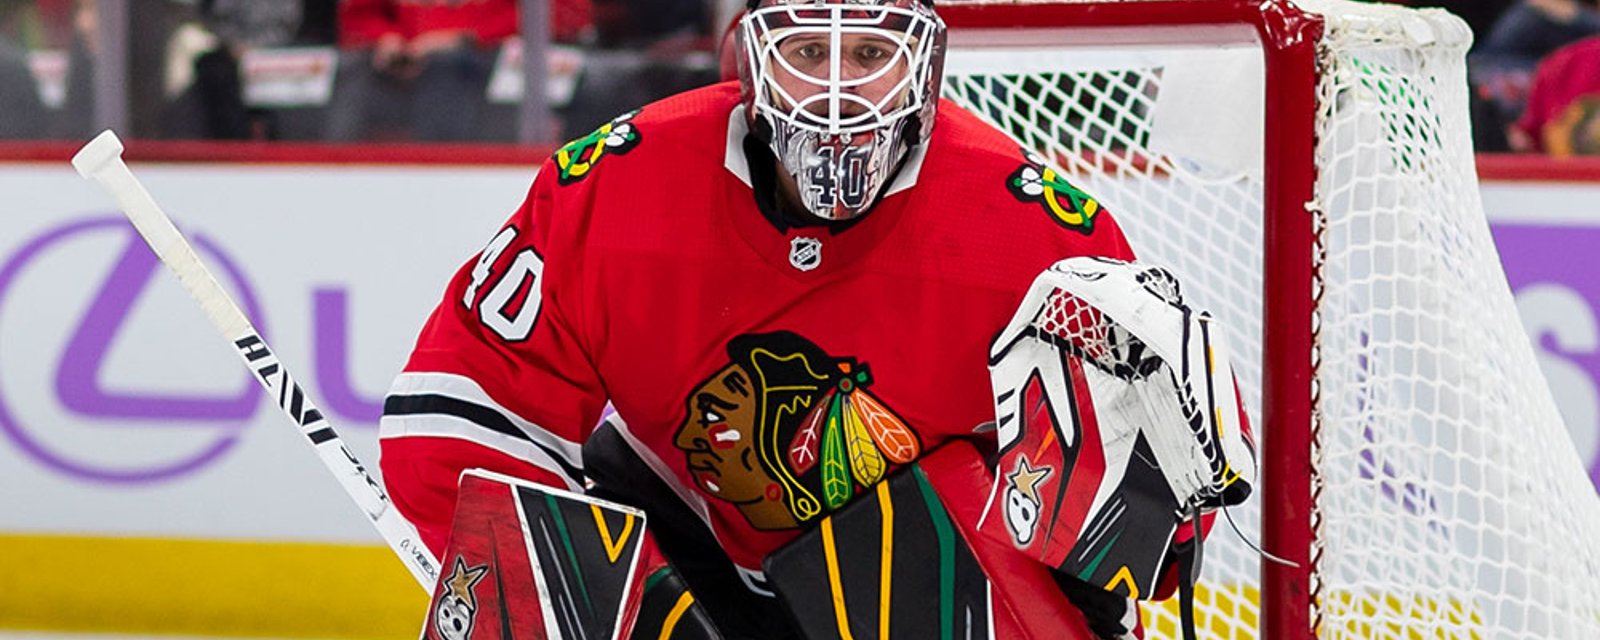 Lehner on contract negotiations and his demands to remain with Blackhawks